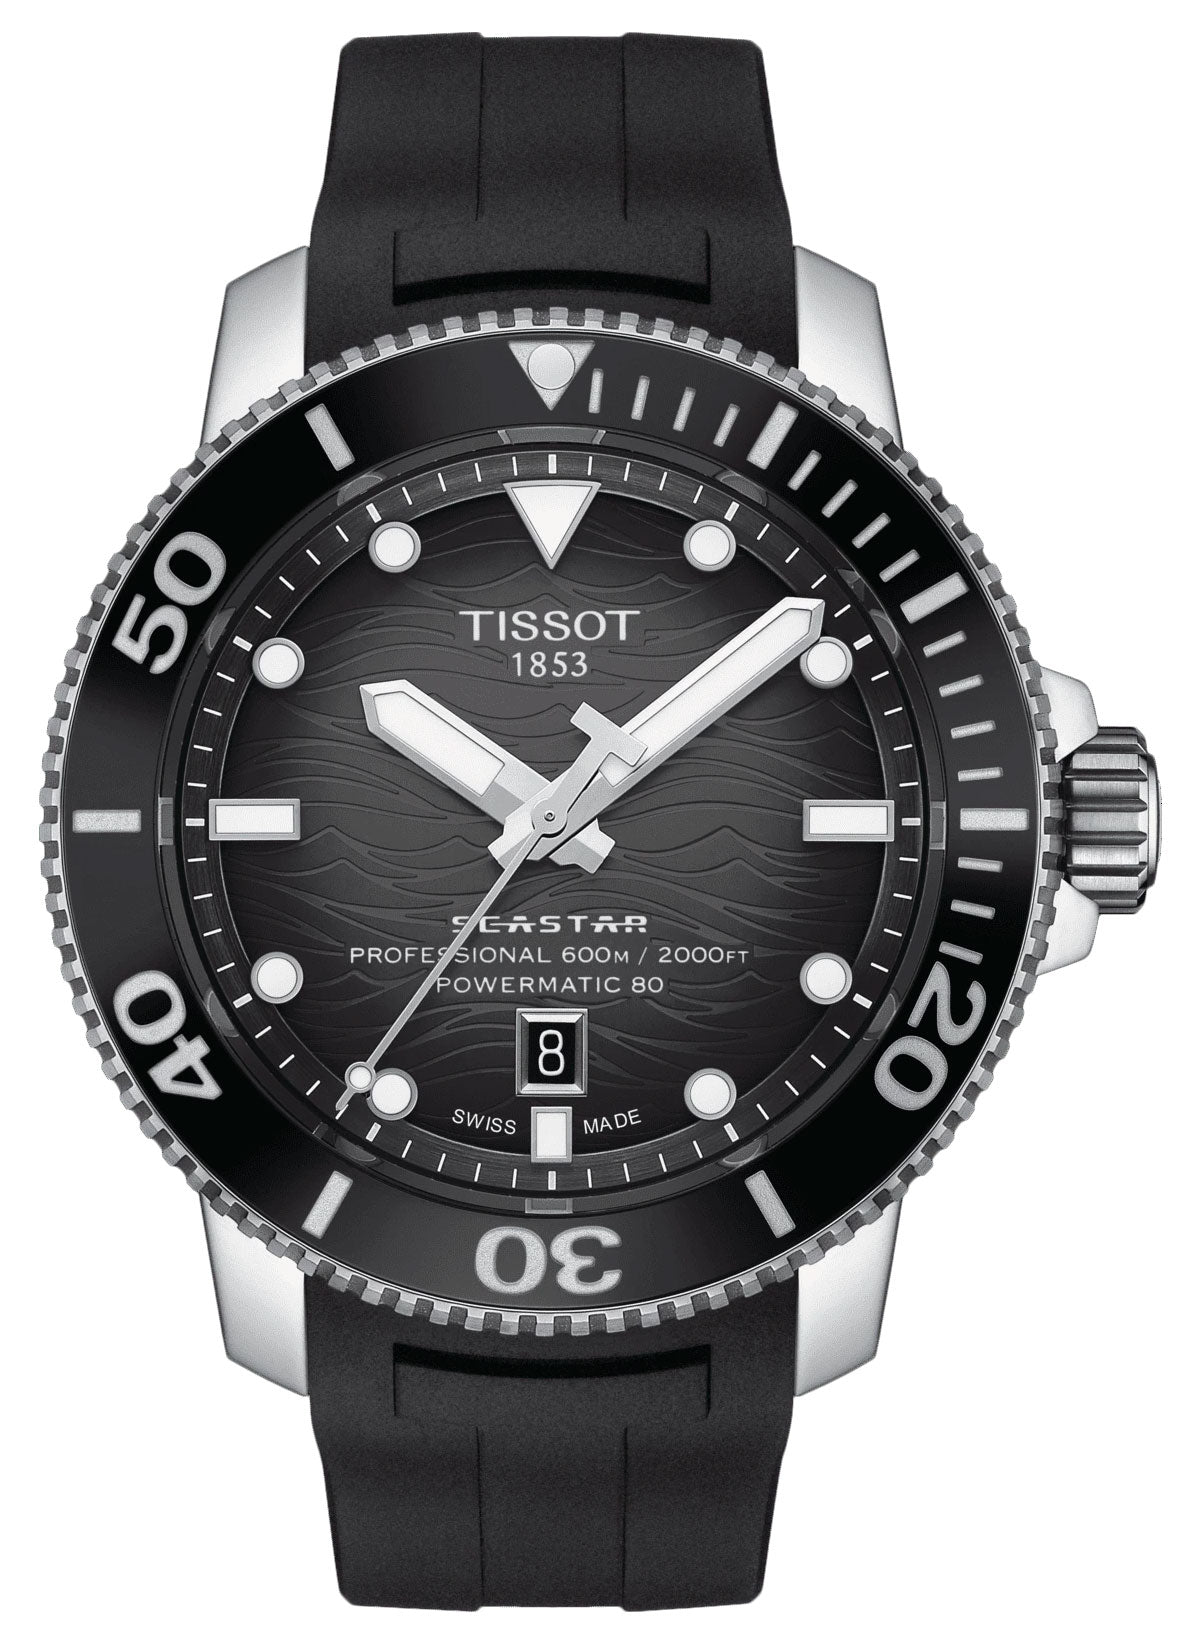 update alt-text with template Watches - Mens-Tissot-T120.607.17.441.00-45 - 50 mm, date, divers, gray, mens, menswatches, new arrivals, powermatic 80, round, rpSKU_2760-SB1-20001, rpSKU_AL-525LBG4V6, rpSKU_T120.607.11.041.00, rpSKU_T120.607.11.041.01, rpSKU_T120.607.17.441.01, rubber, Seastar, stainless steel case, swiss automatic, Tissot, uni-directional rotating bezel, watches-Watches & Beyond